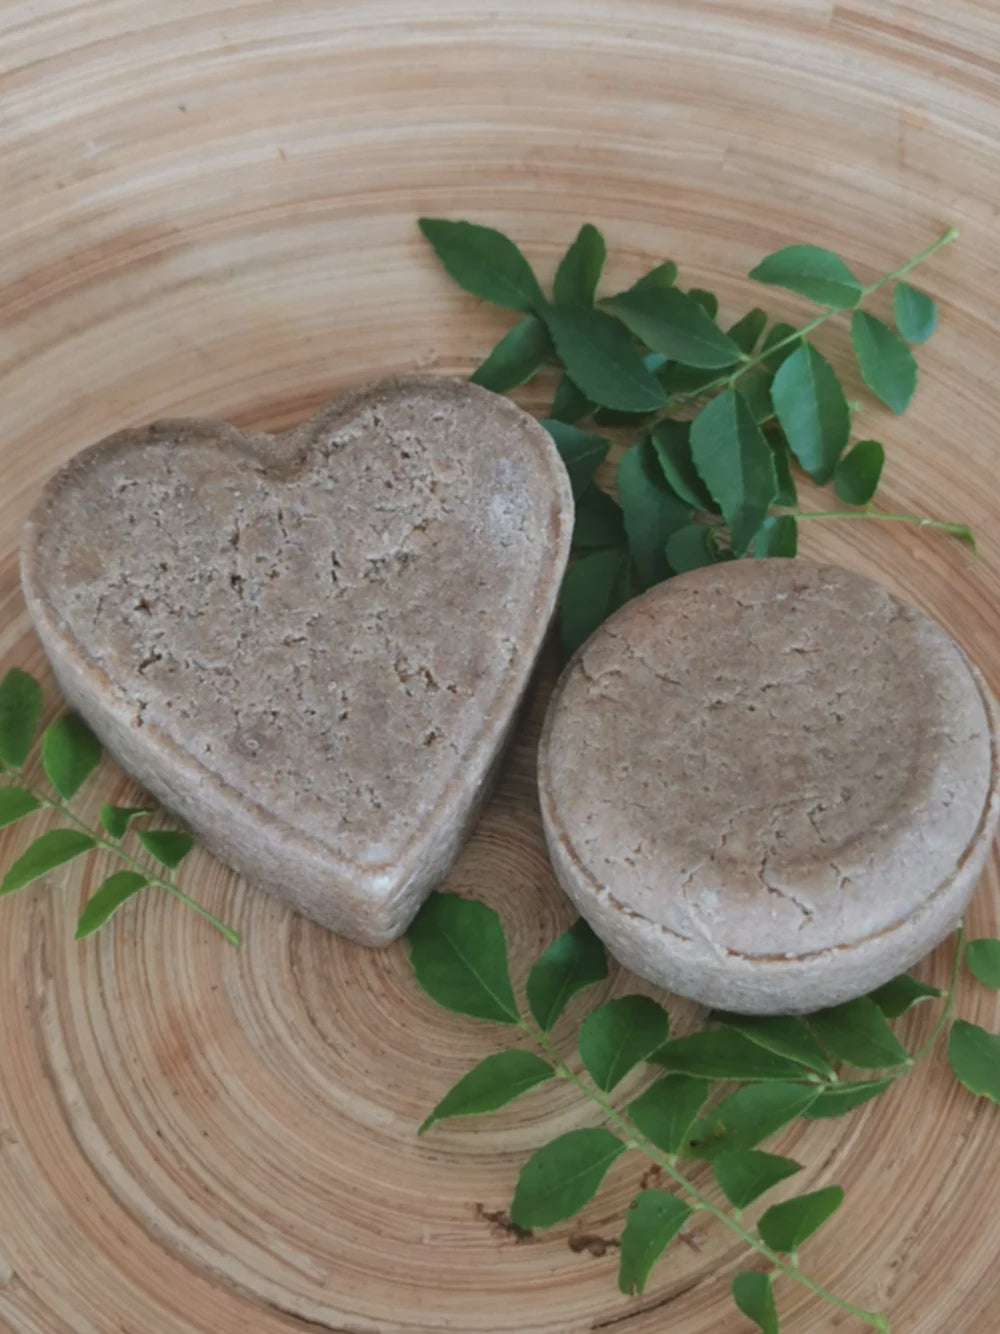 Patrichory Herbal Therapy Shampoo Bar | Haircare | The Green Collective SG